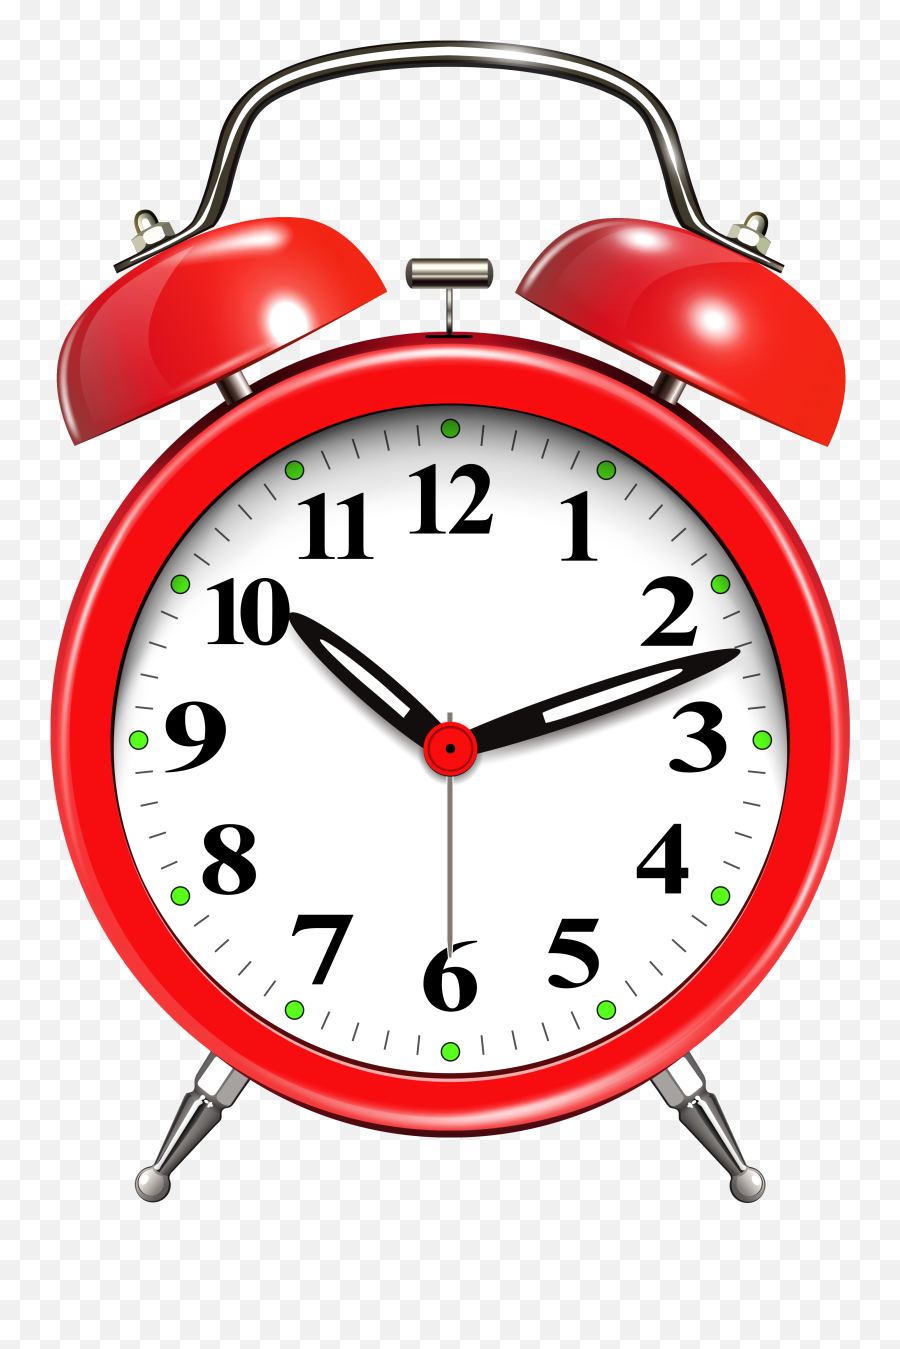 School Clock Png Royalty Free Files - Alarm Clock With Transparent Background,Clocks Png